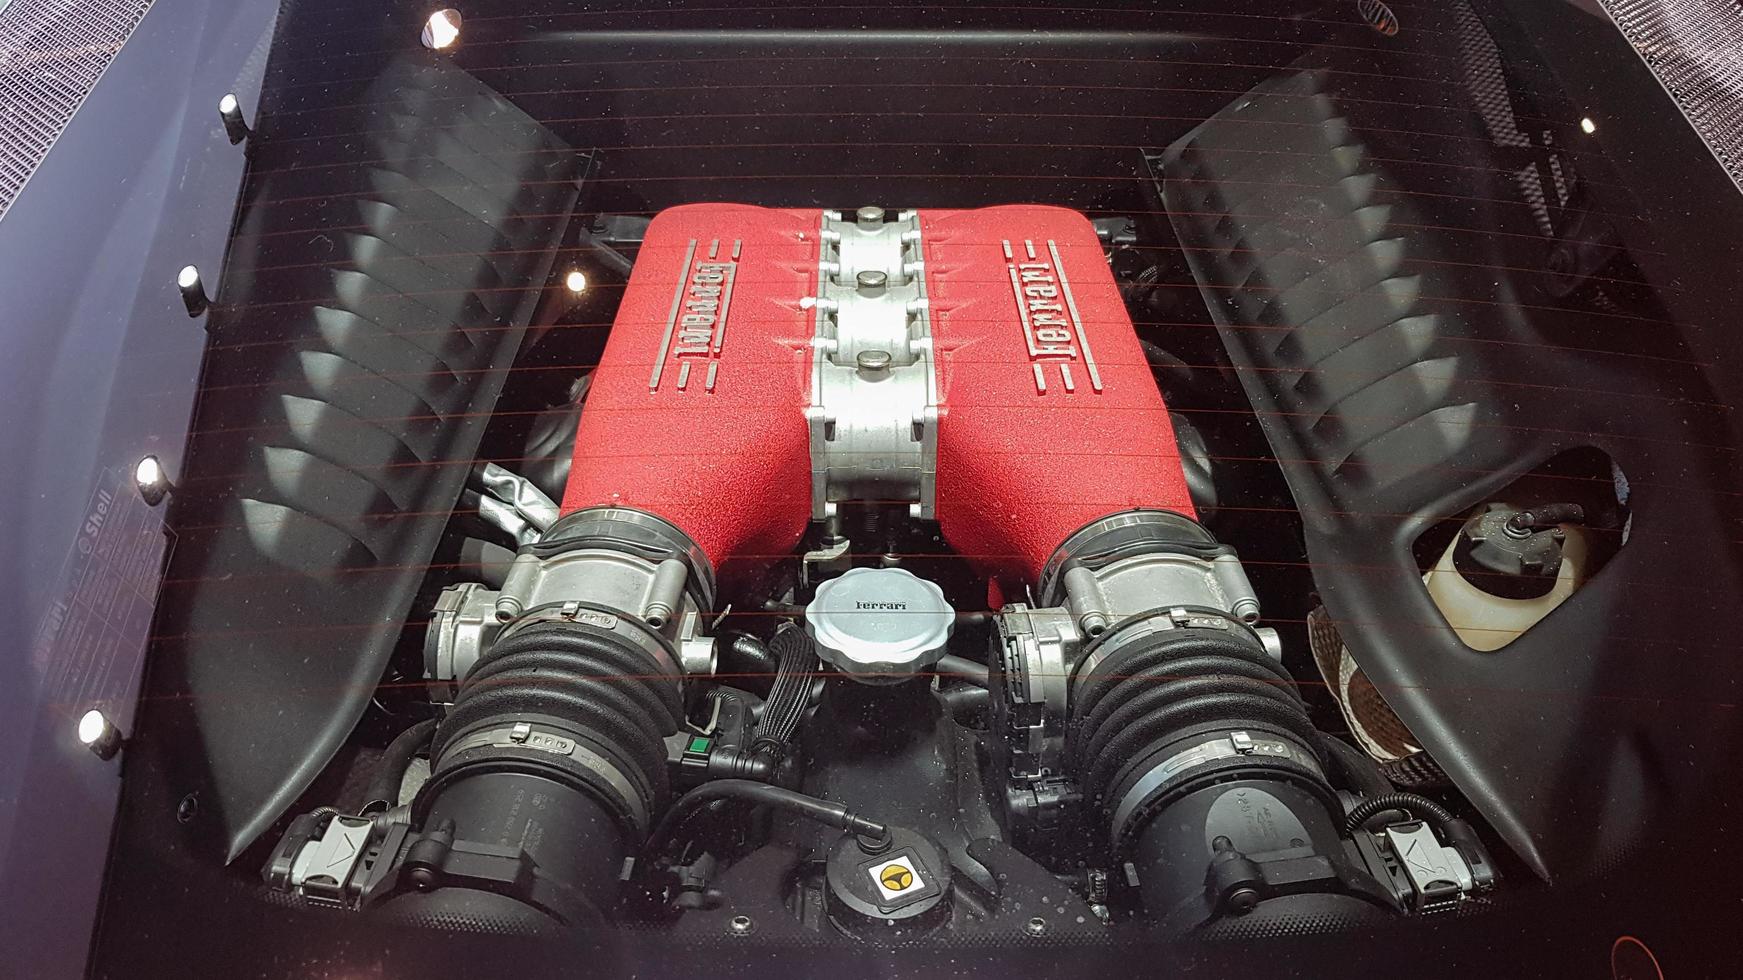 A red Ferrari engine is parked in TNP's car, Rama 9 Road. A close-up of the glass cover of a Ferrari engine in a car dealership. Top view of the engine compartment. Ukraine, Kiev - October 16, 2020. photo